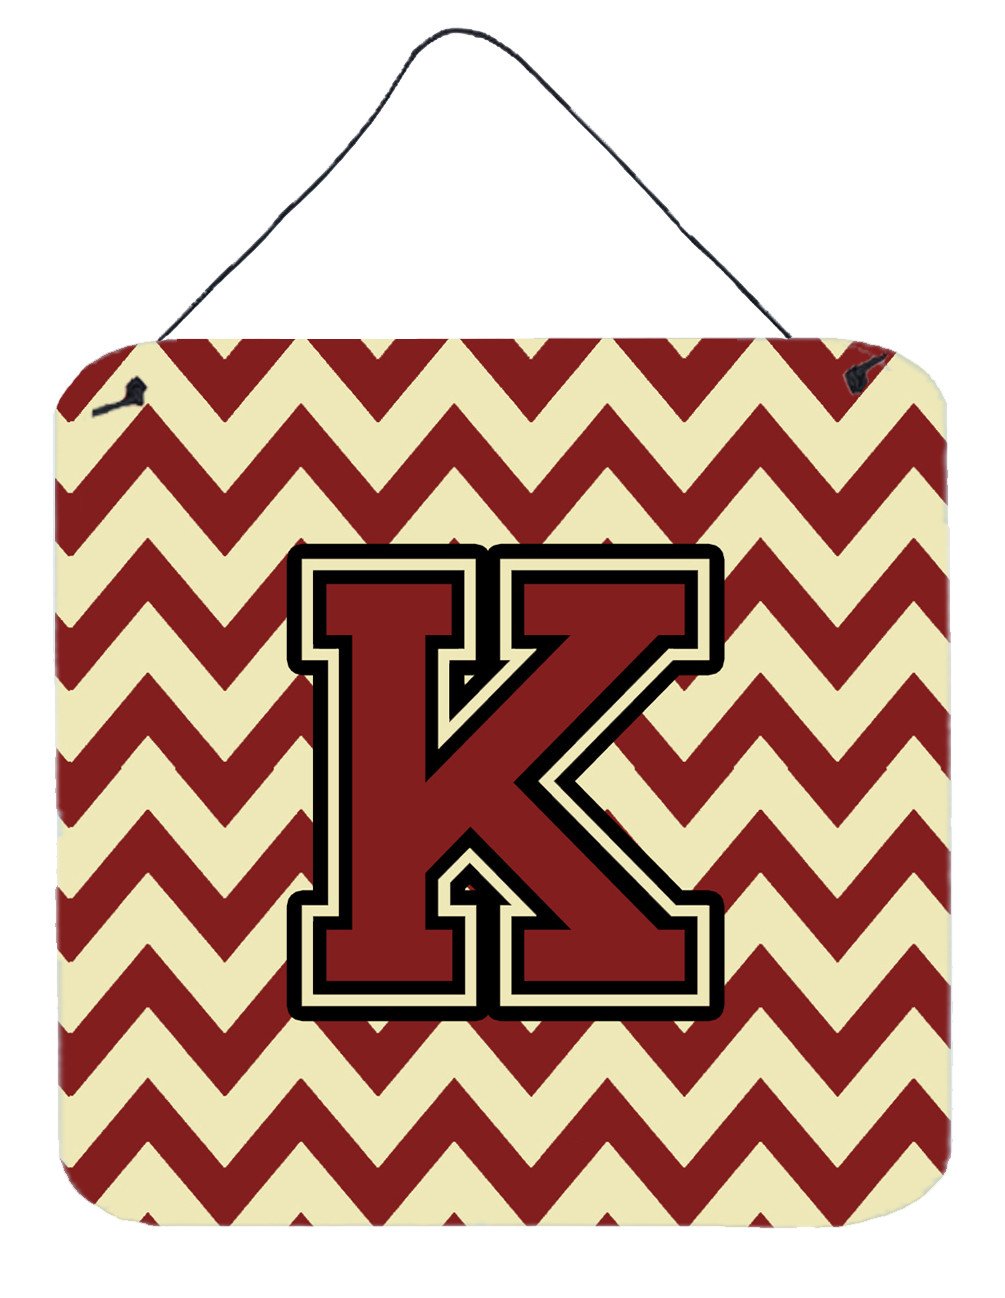 Letter K Chevron Maroon and Gold Wall or Door Hanging Prints CJ1061-KDS66 by Caroline's Treasures